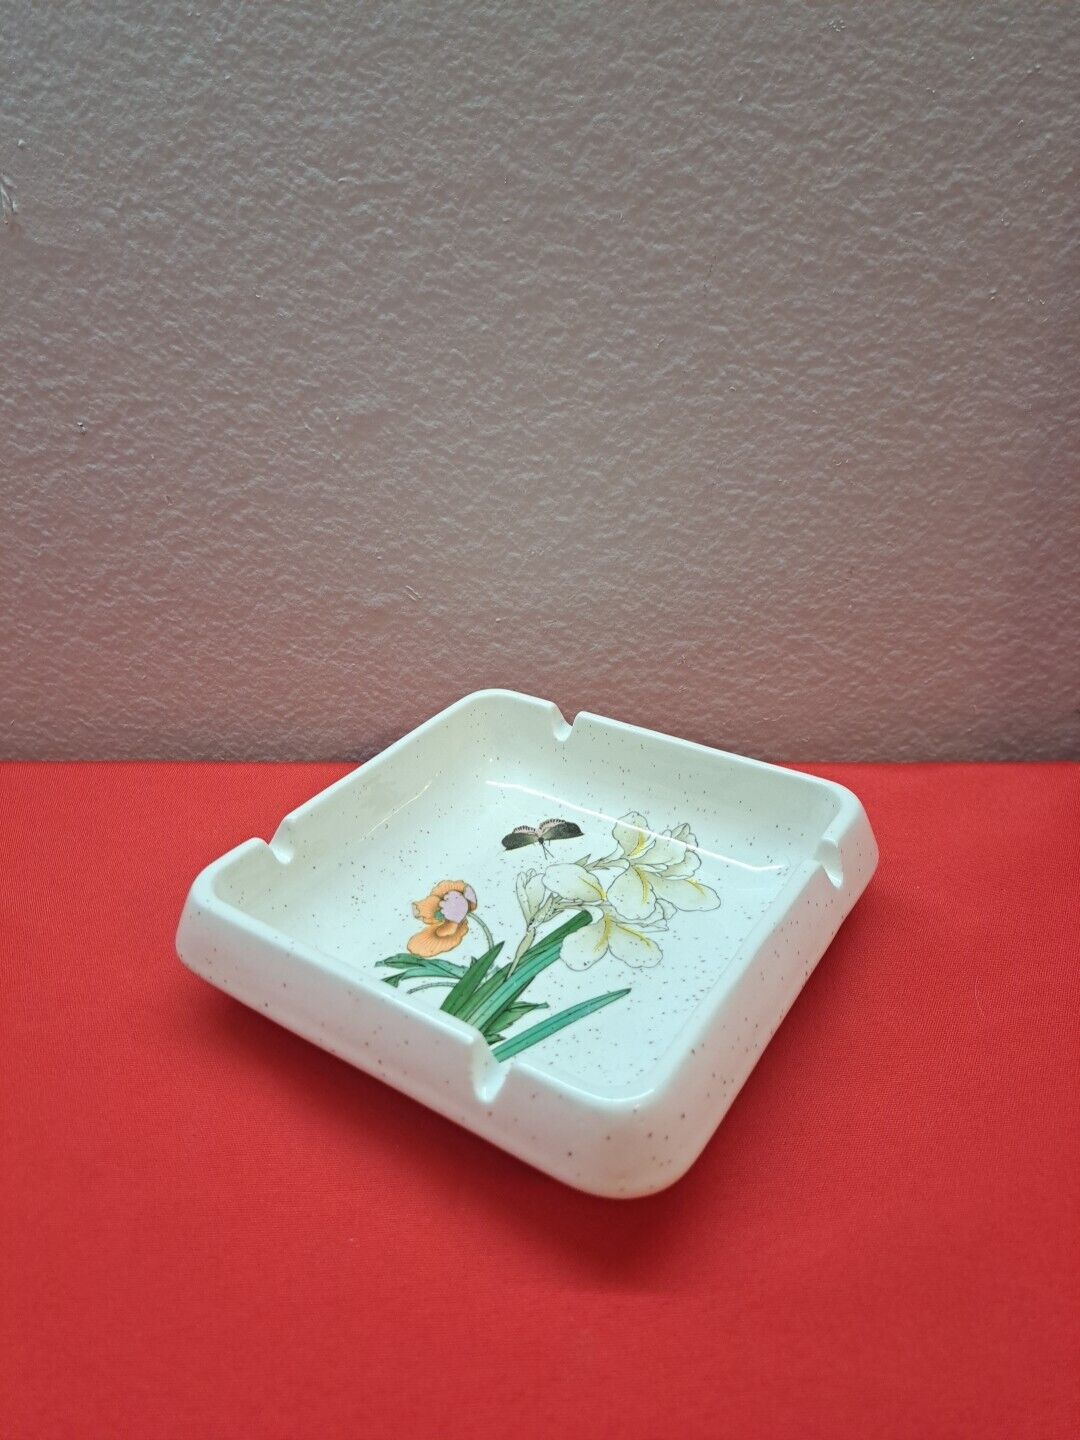 Vintage Treasure Craft Ashtray Trinket Dish White Lily Flowers Butterfly